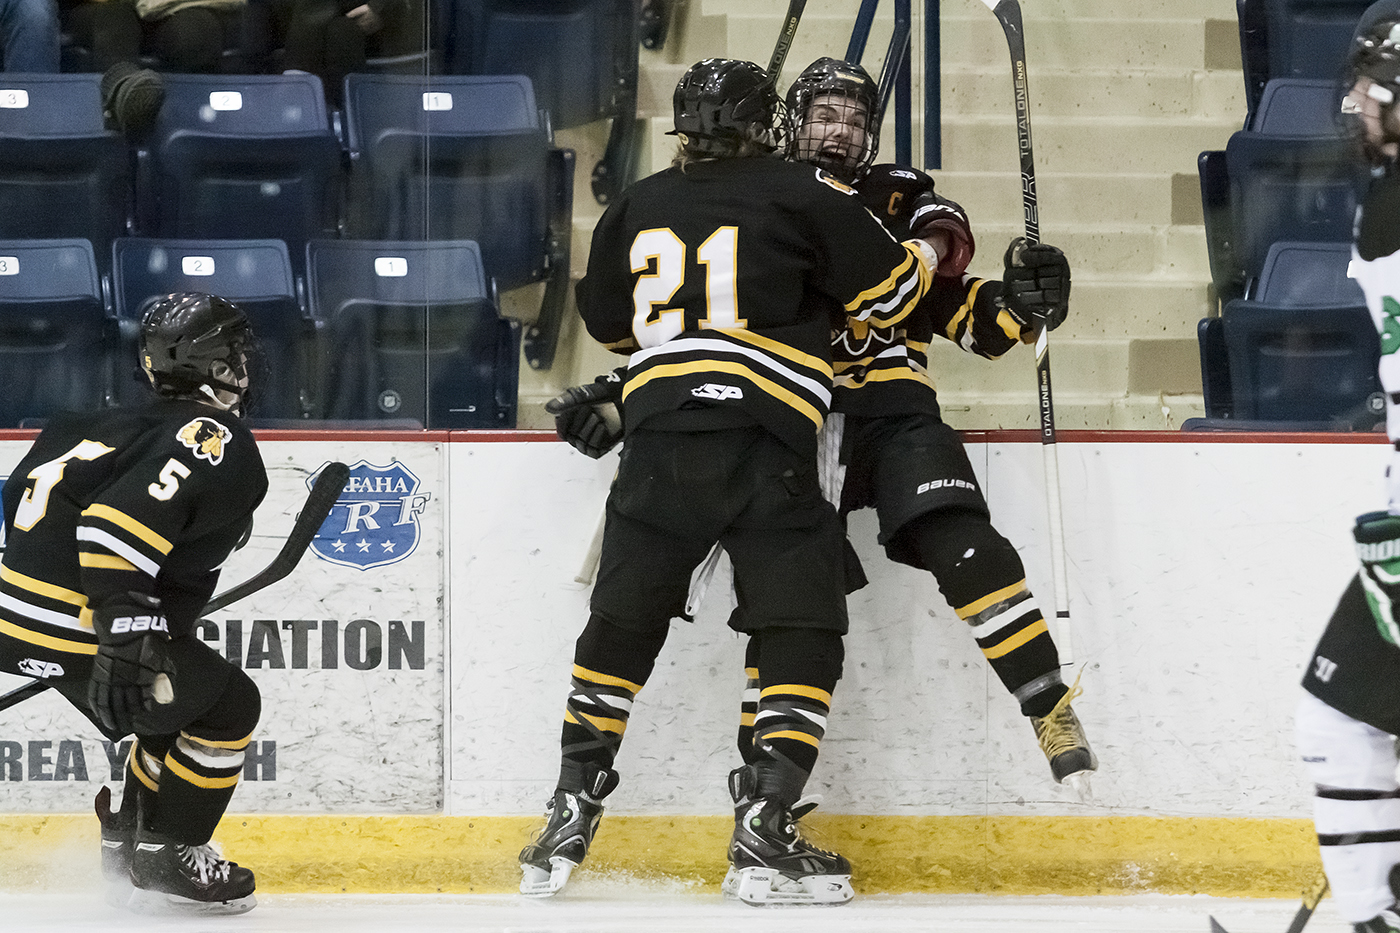 IM Kyle Sylvester, Jared Bethune, and Koby Roth celebrate after Sylvester ties the game in the second period.G_8327